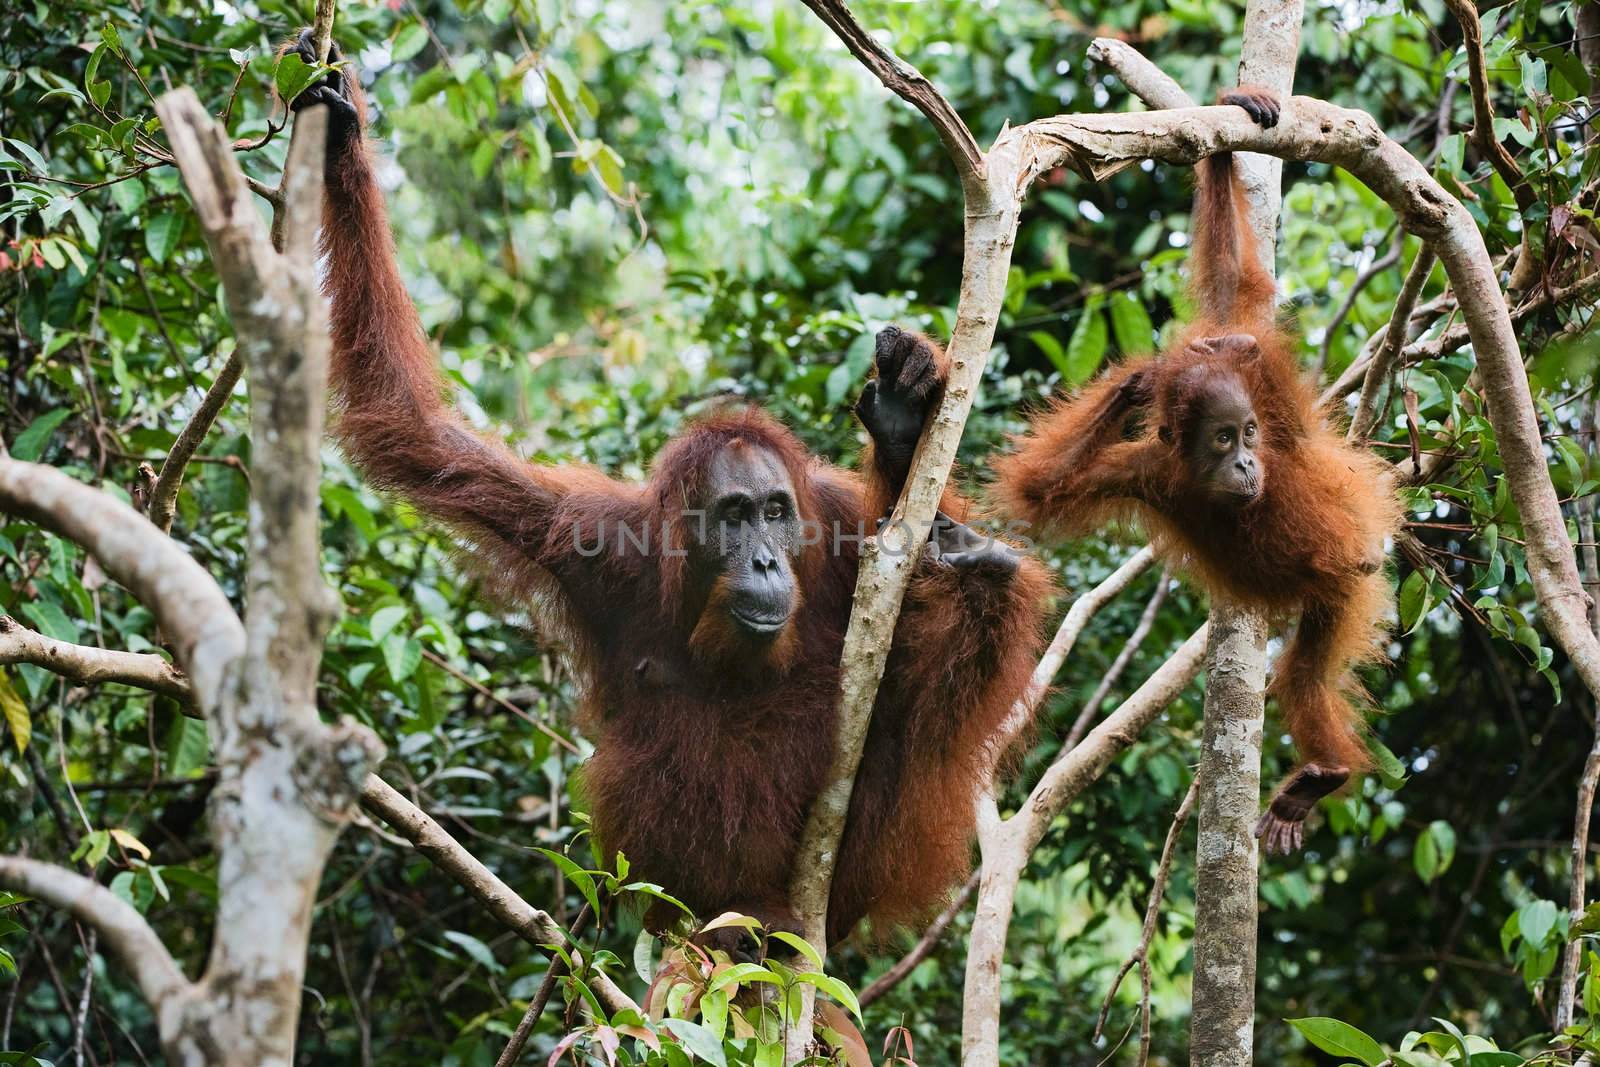 Female the orangutan with the kid in branches of trees. Indonesia.Borneo